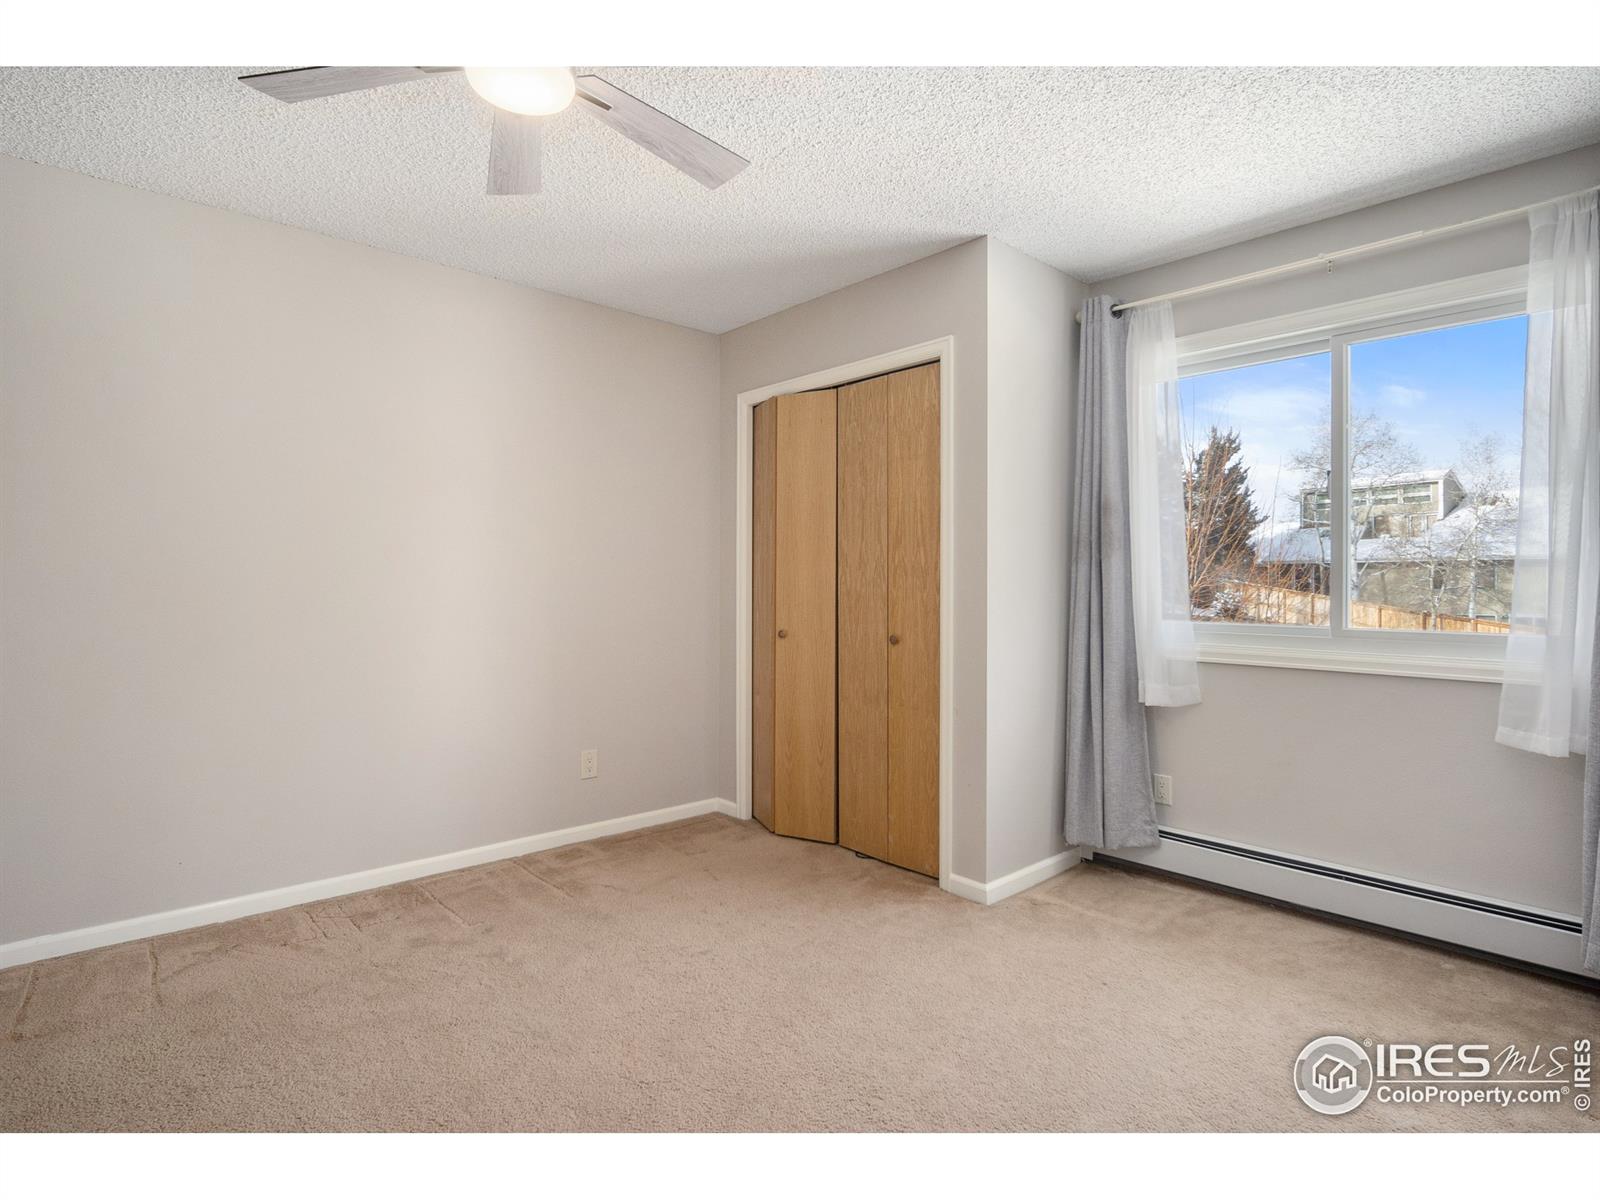 4119 15th, Greeley, CO